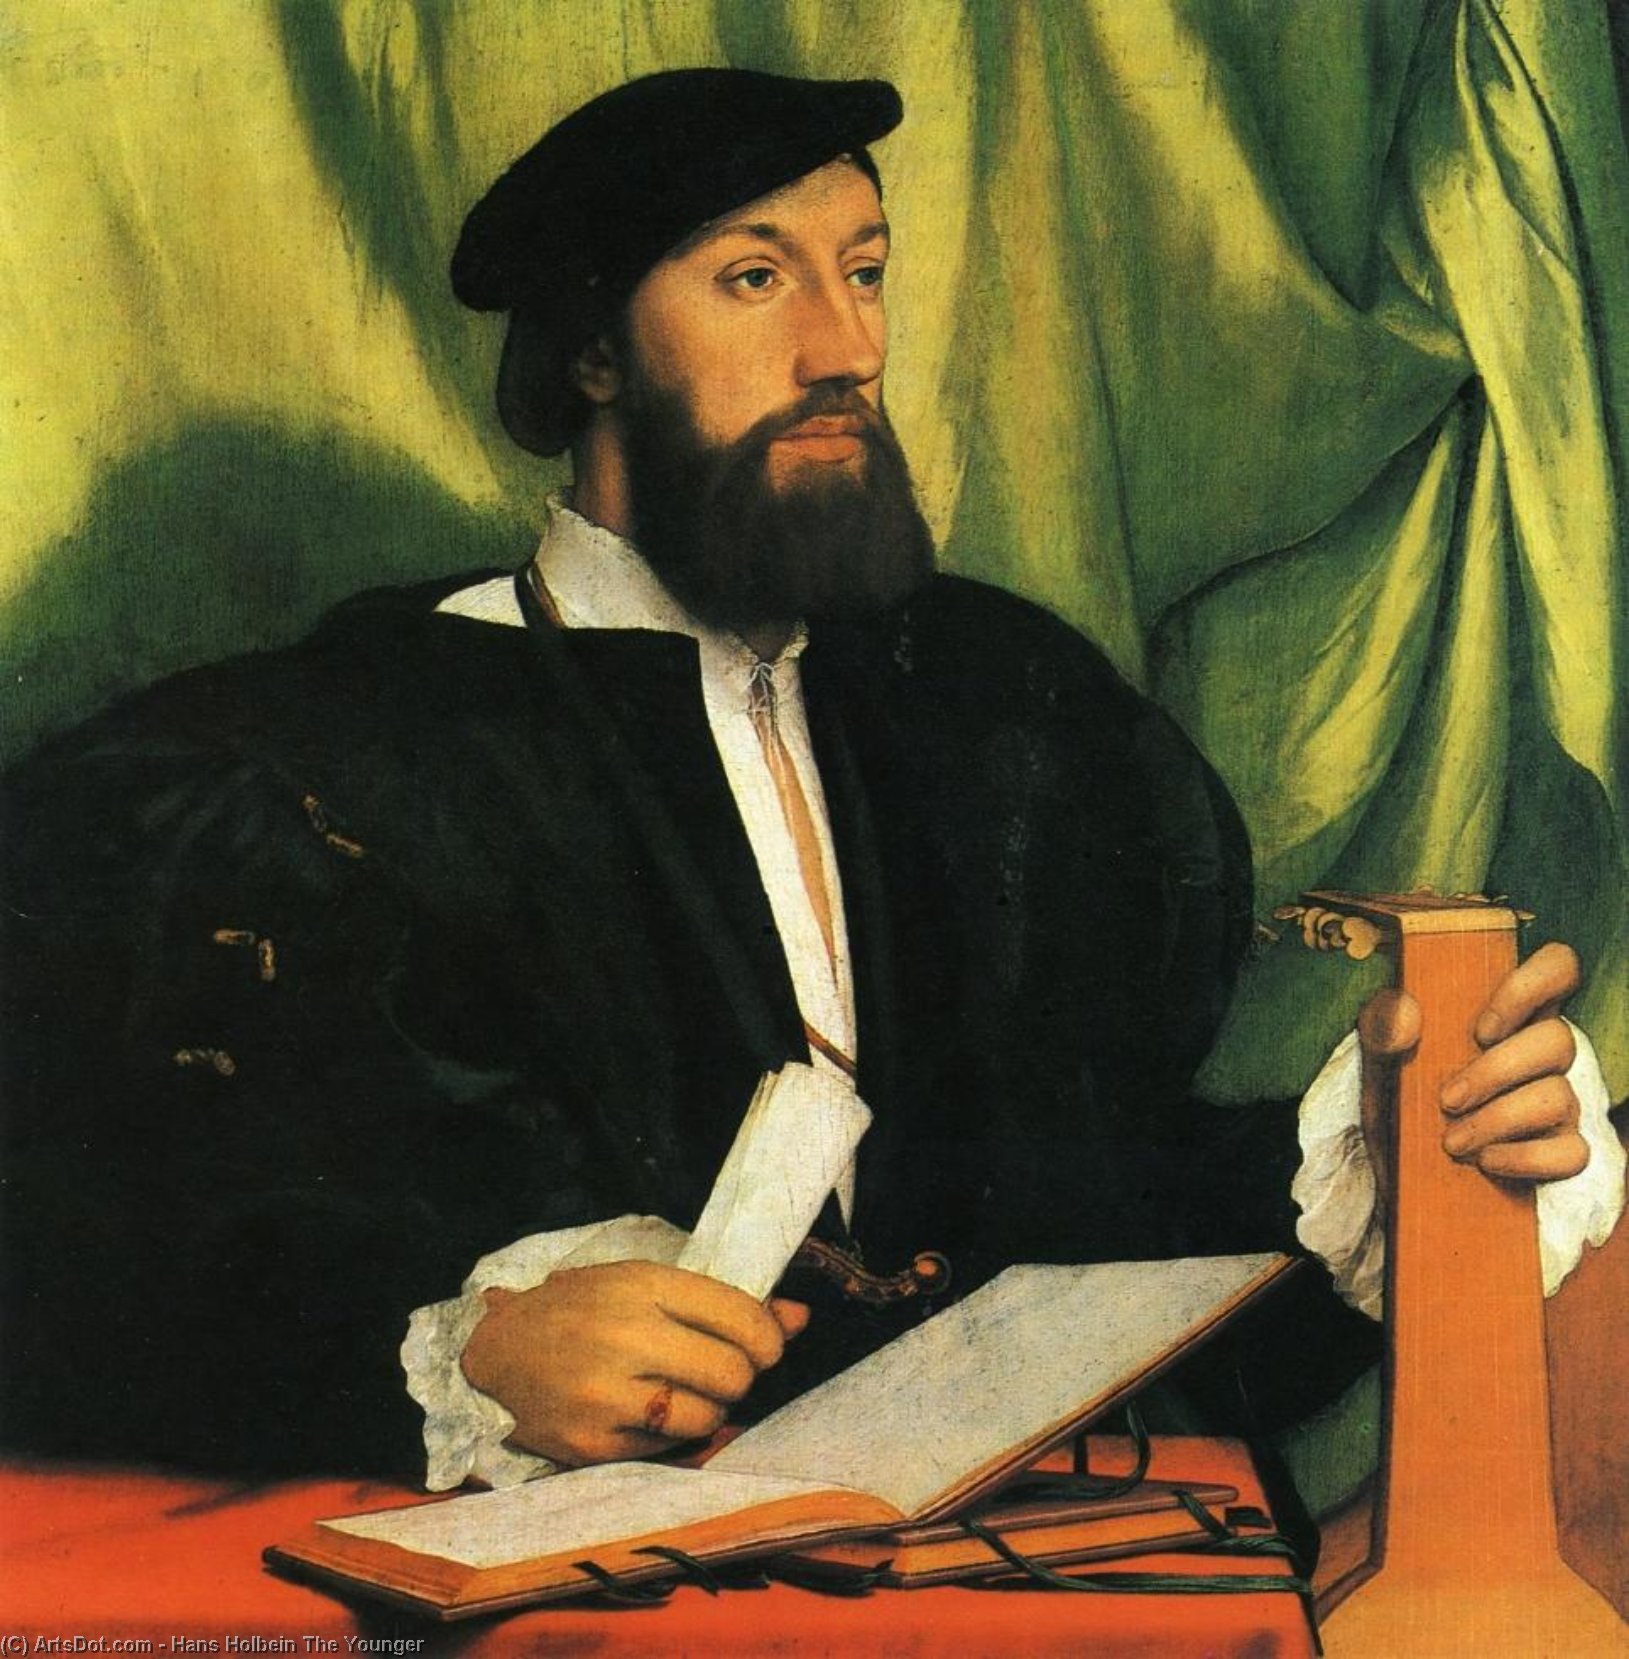 WikiOO.org - Enciclopédia das Belas Artes - Pintura, Arte por Hans Holbein The Younger - Unknown Gengleman with Music Books and Lute